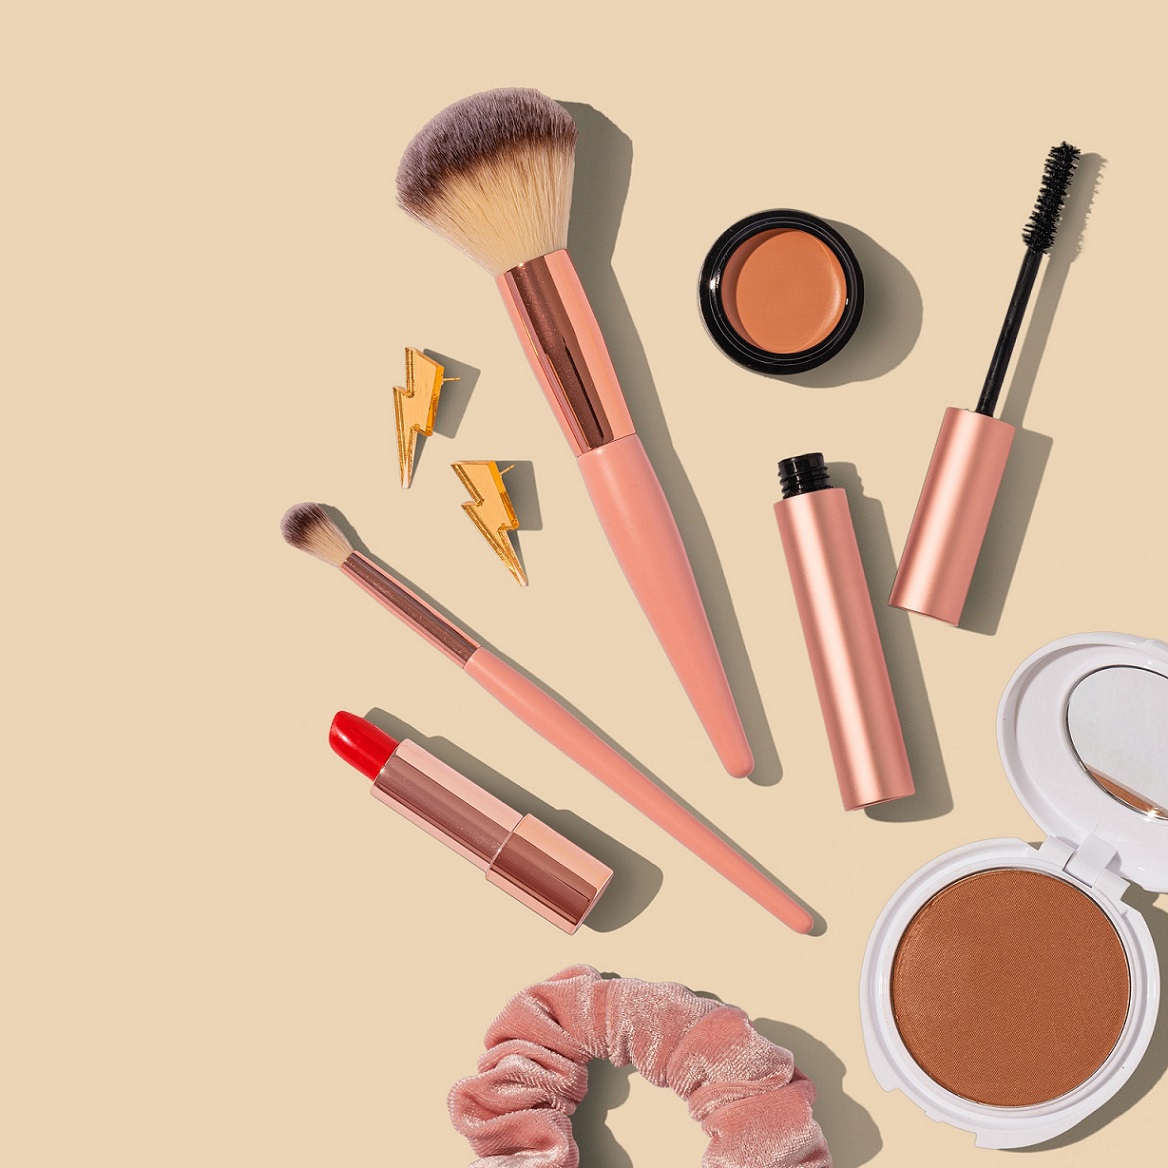 Hide The Skin Flaws With The Best Makeup Products